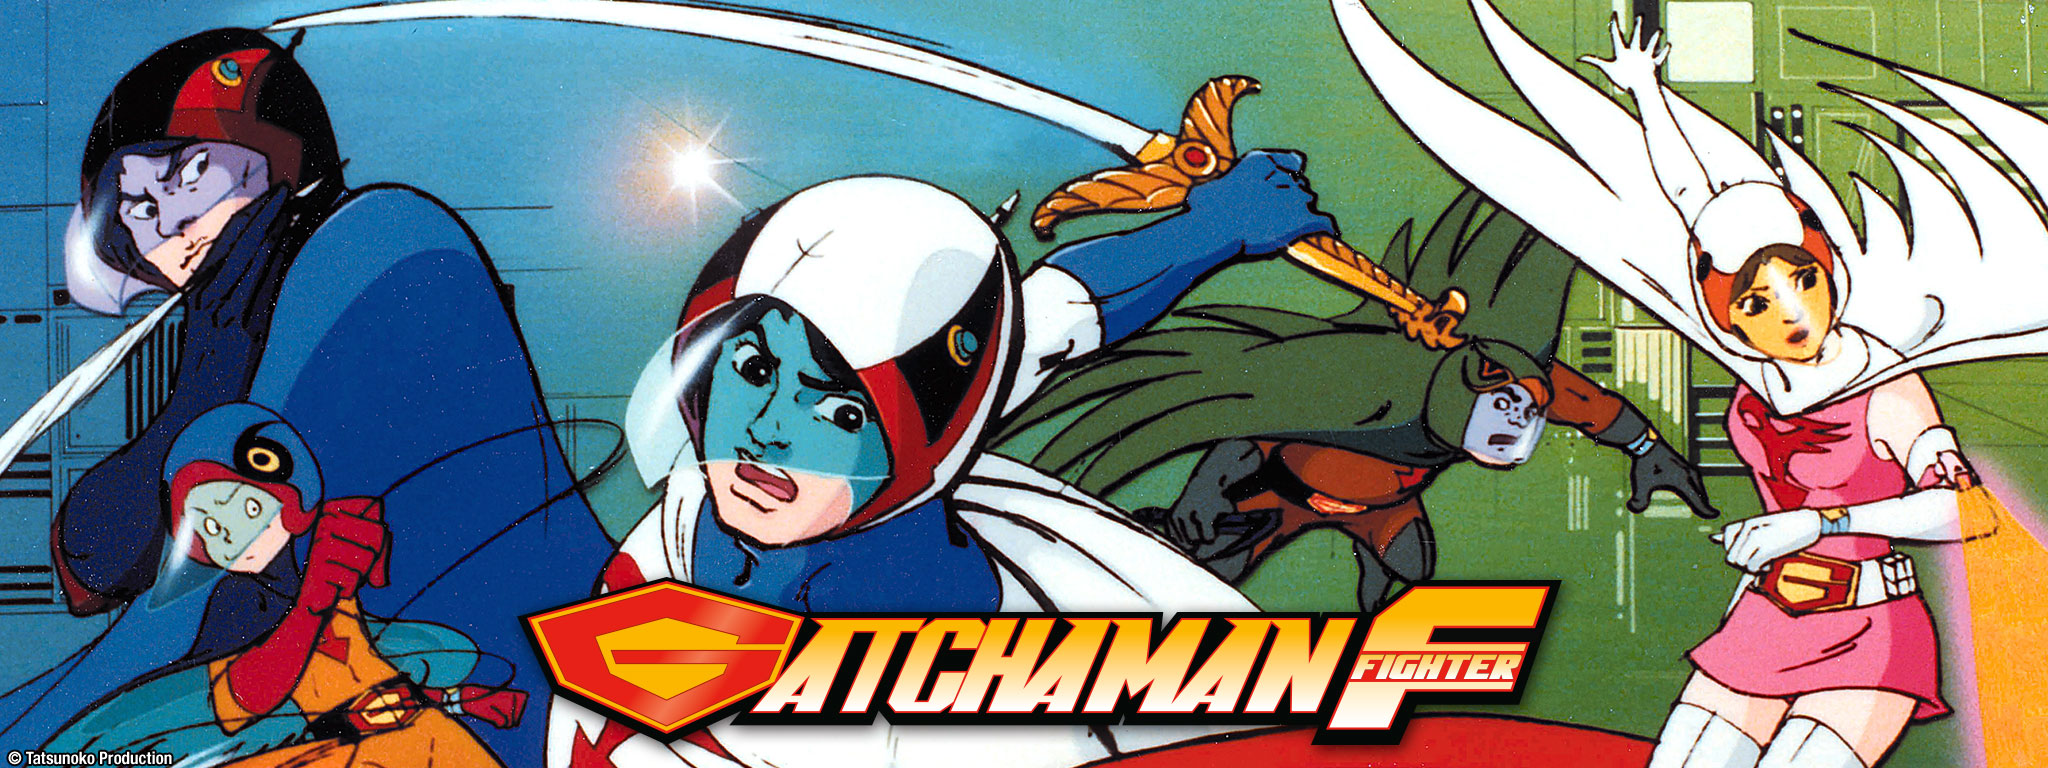 Title Art for Gatchaman Fighter